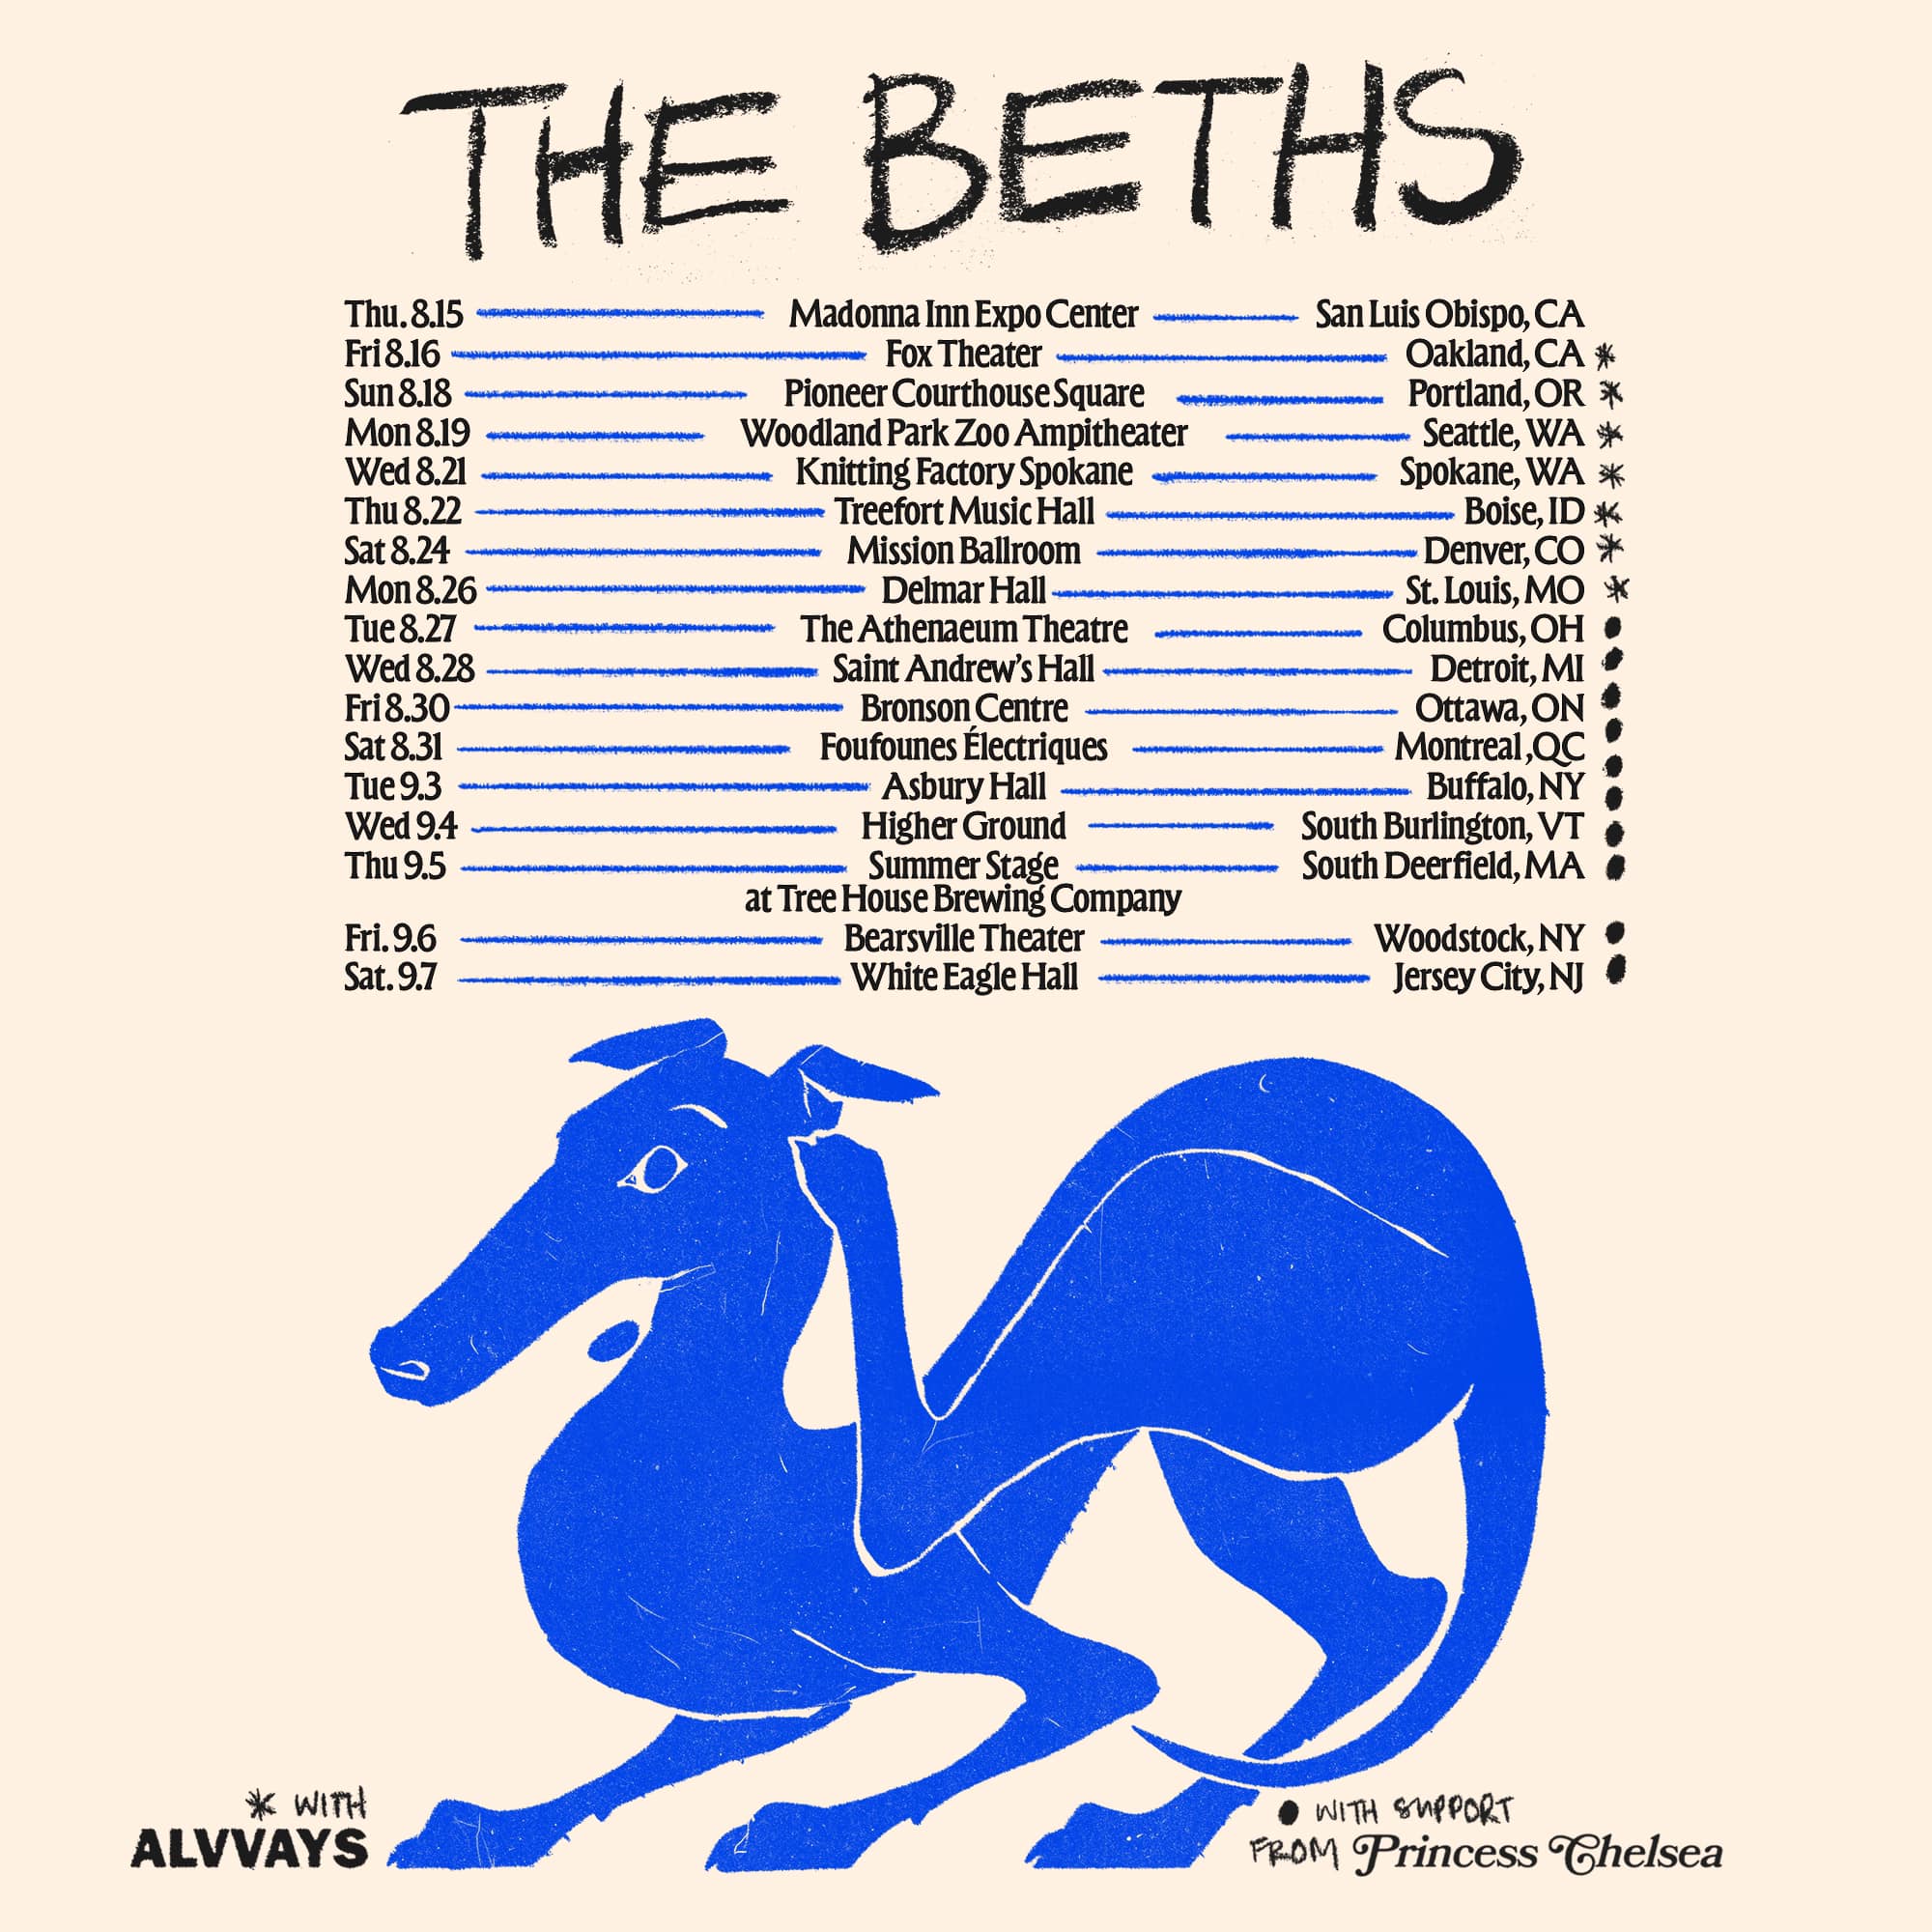 The Beths tour poster